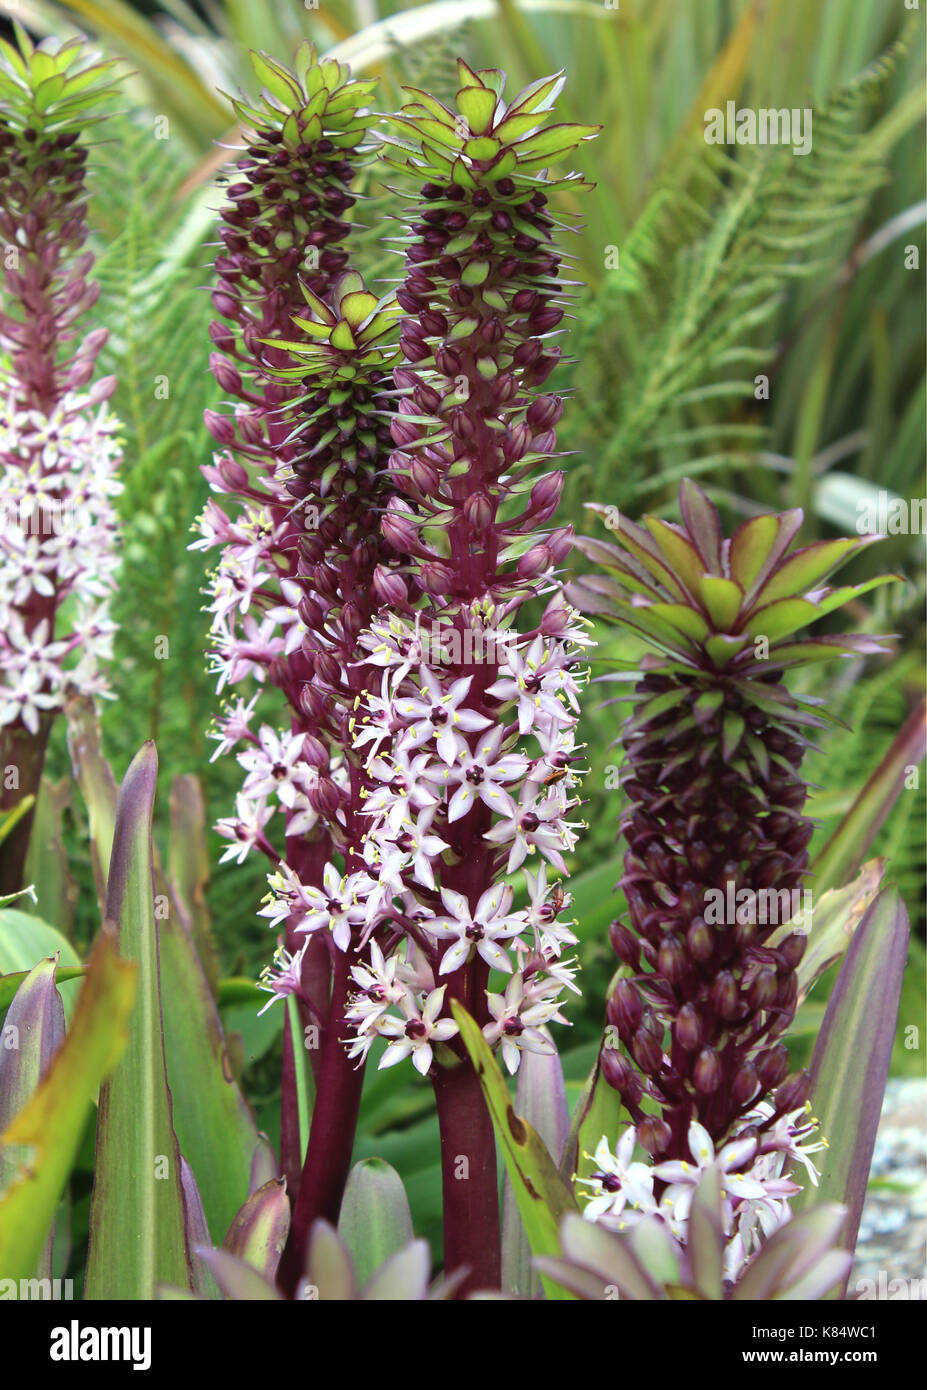 The unusual pink flower spikes of the South African plant Eucomis comosa, also known as the Pineapple Flower or Pineapple Lily. Stock Photo